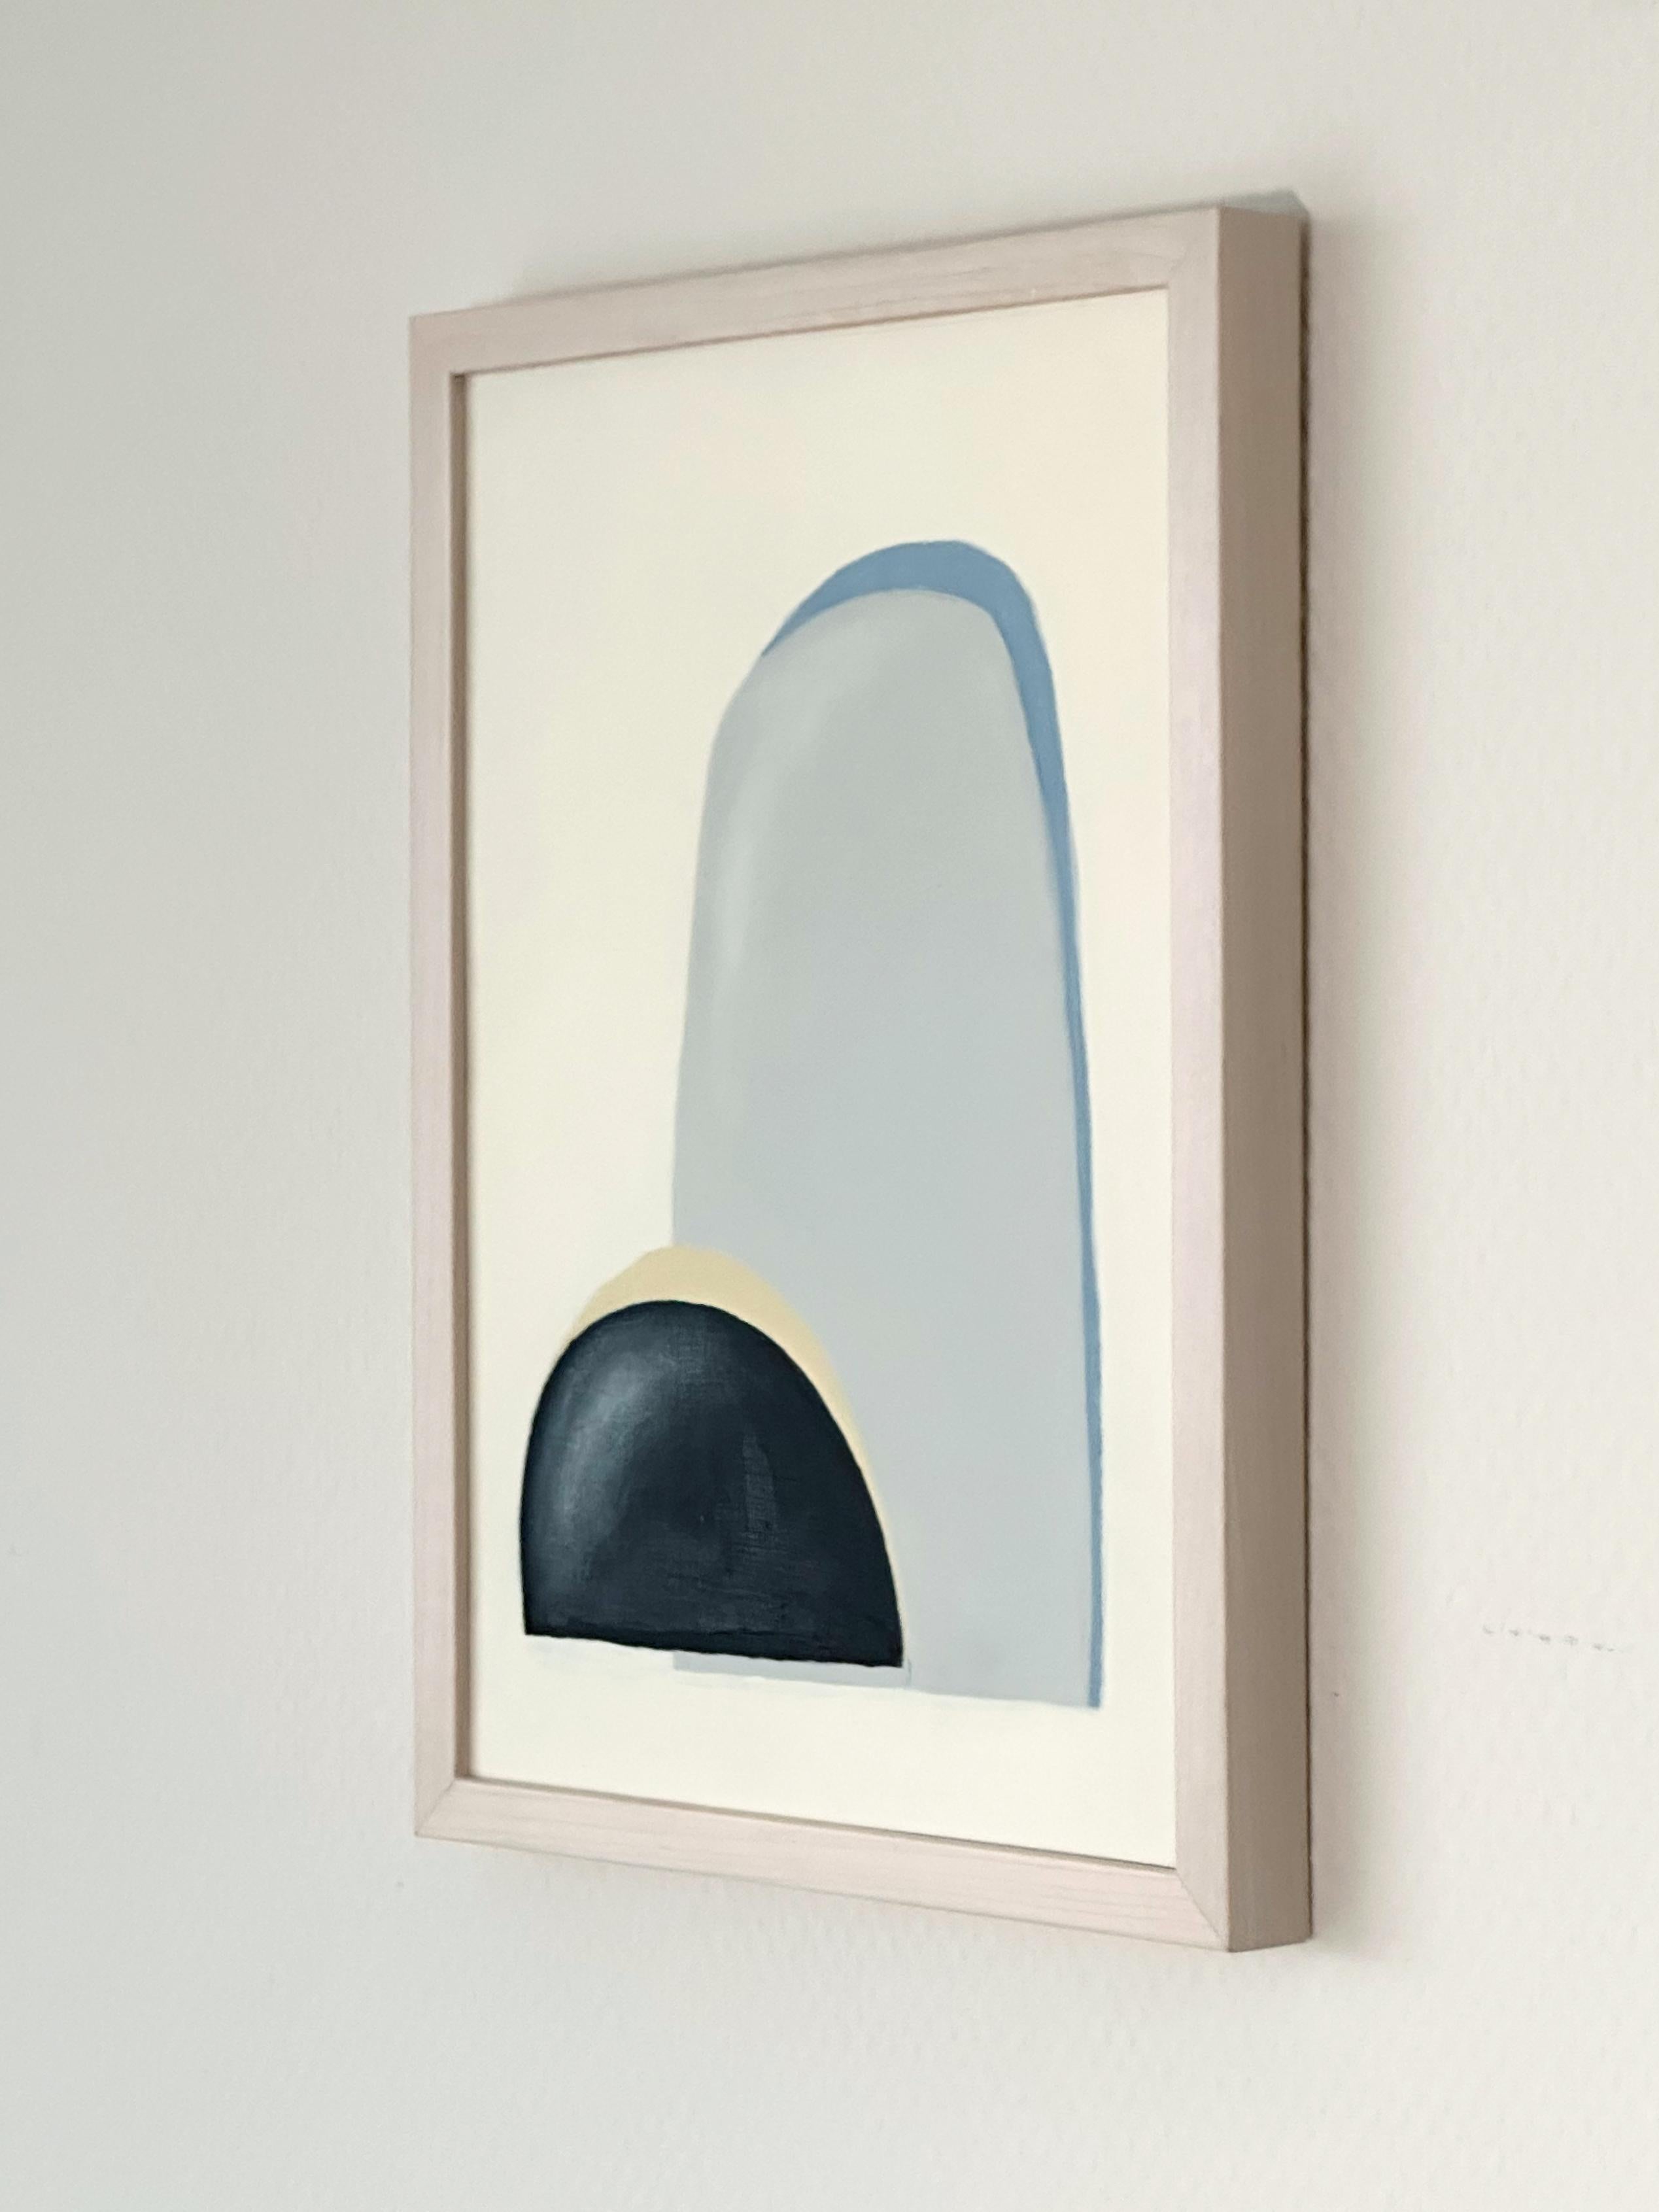 One in a series of small works on paper created in 2021 by Amanda Andersen.

This painting has a solid neutral cream background with simple asymmetric shapes in black and grey; each shape has a modest shadow of light blue and beige. The texture of